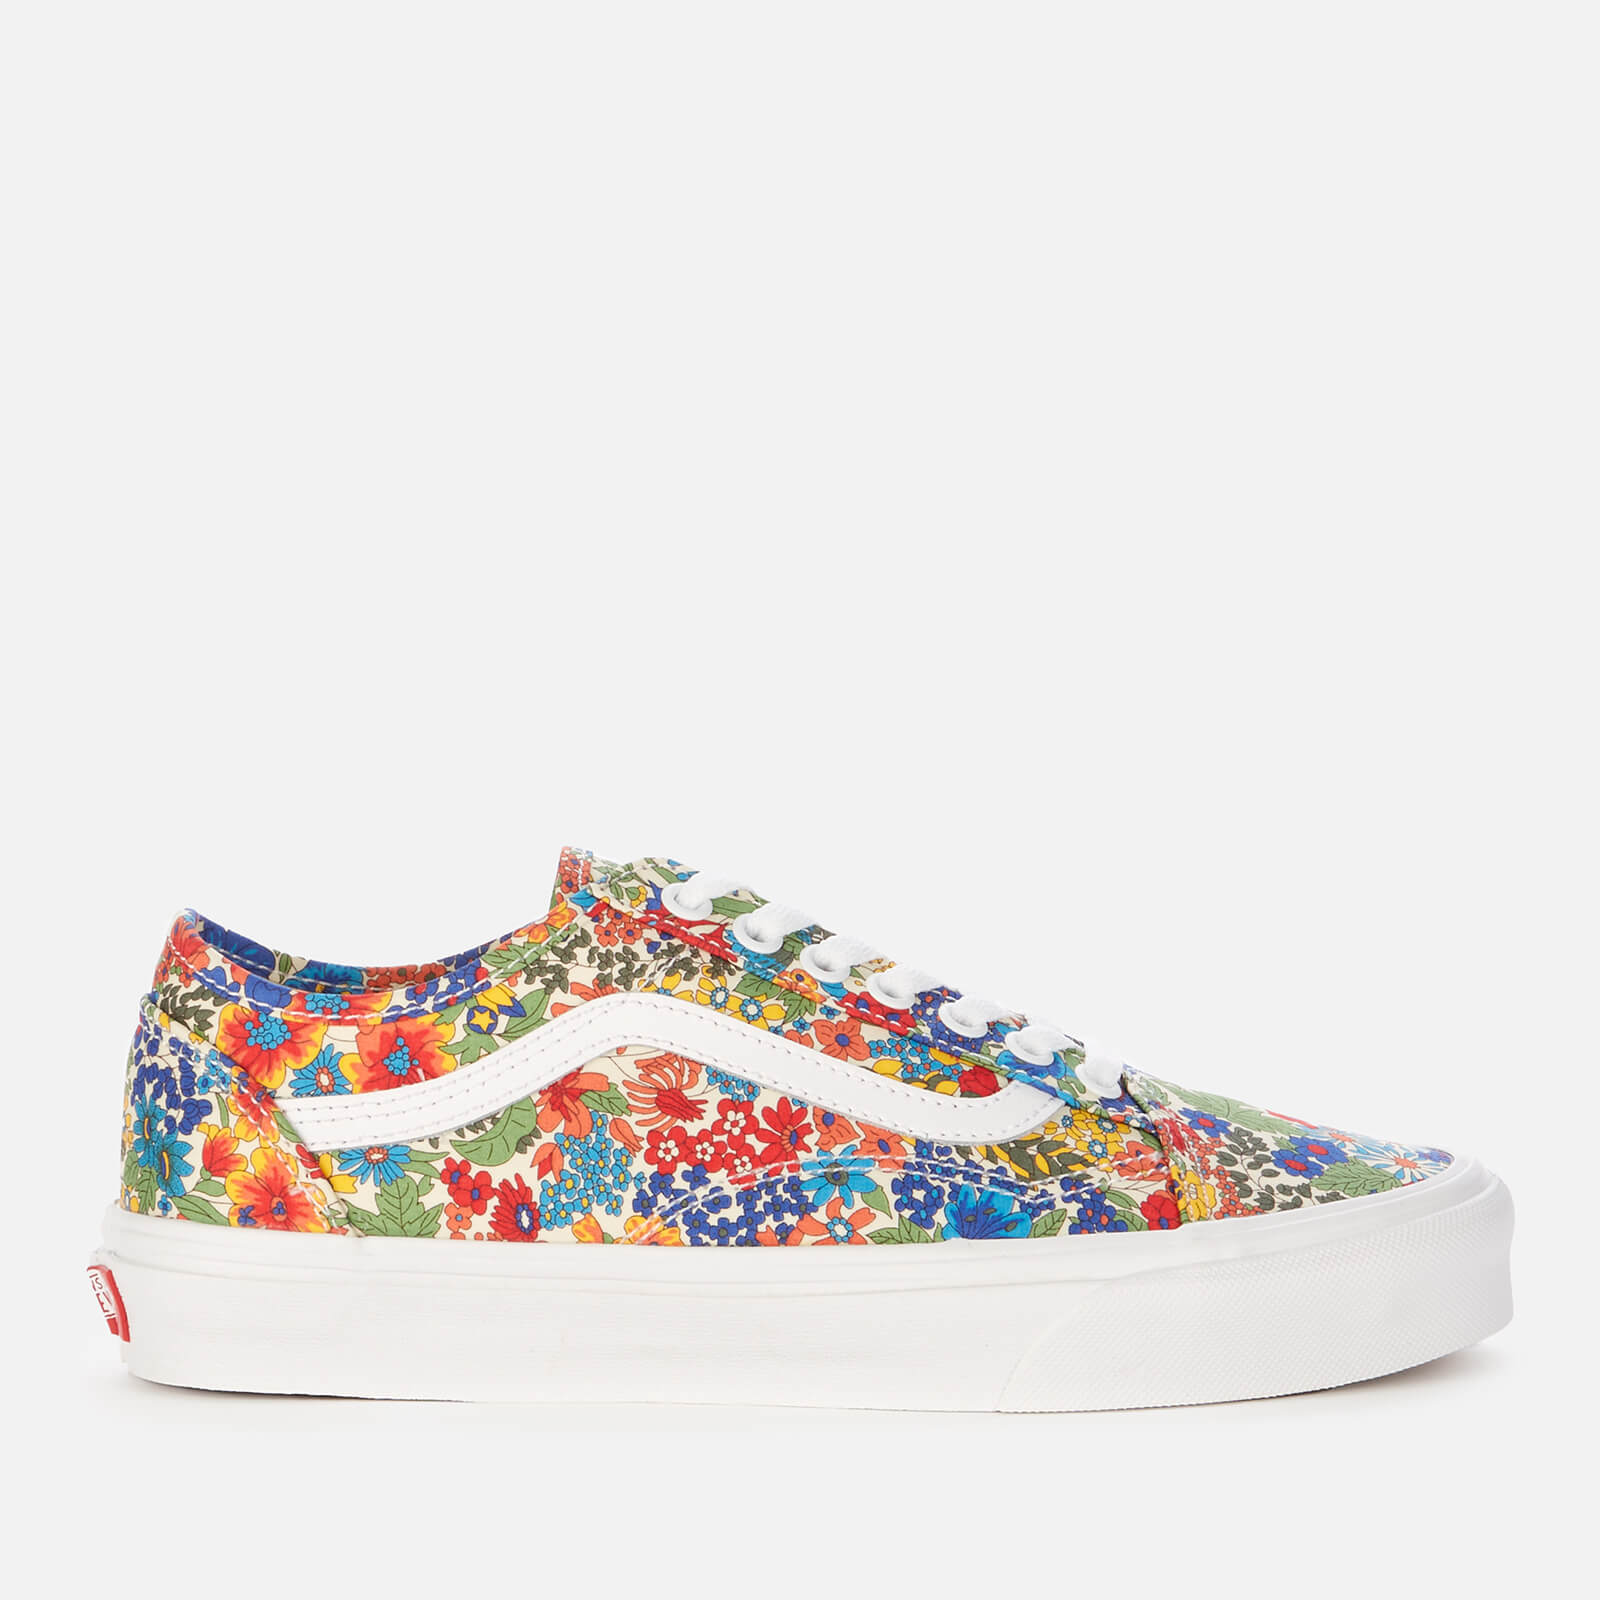 Vans X Liberty London Women's Old Skool Tapered Trainers - Multi/Yellow Floral - UK 3